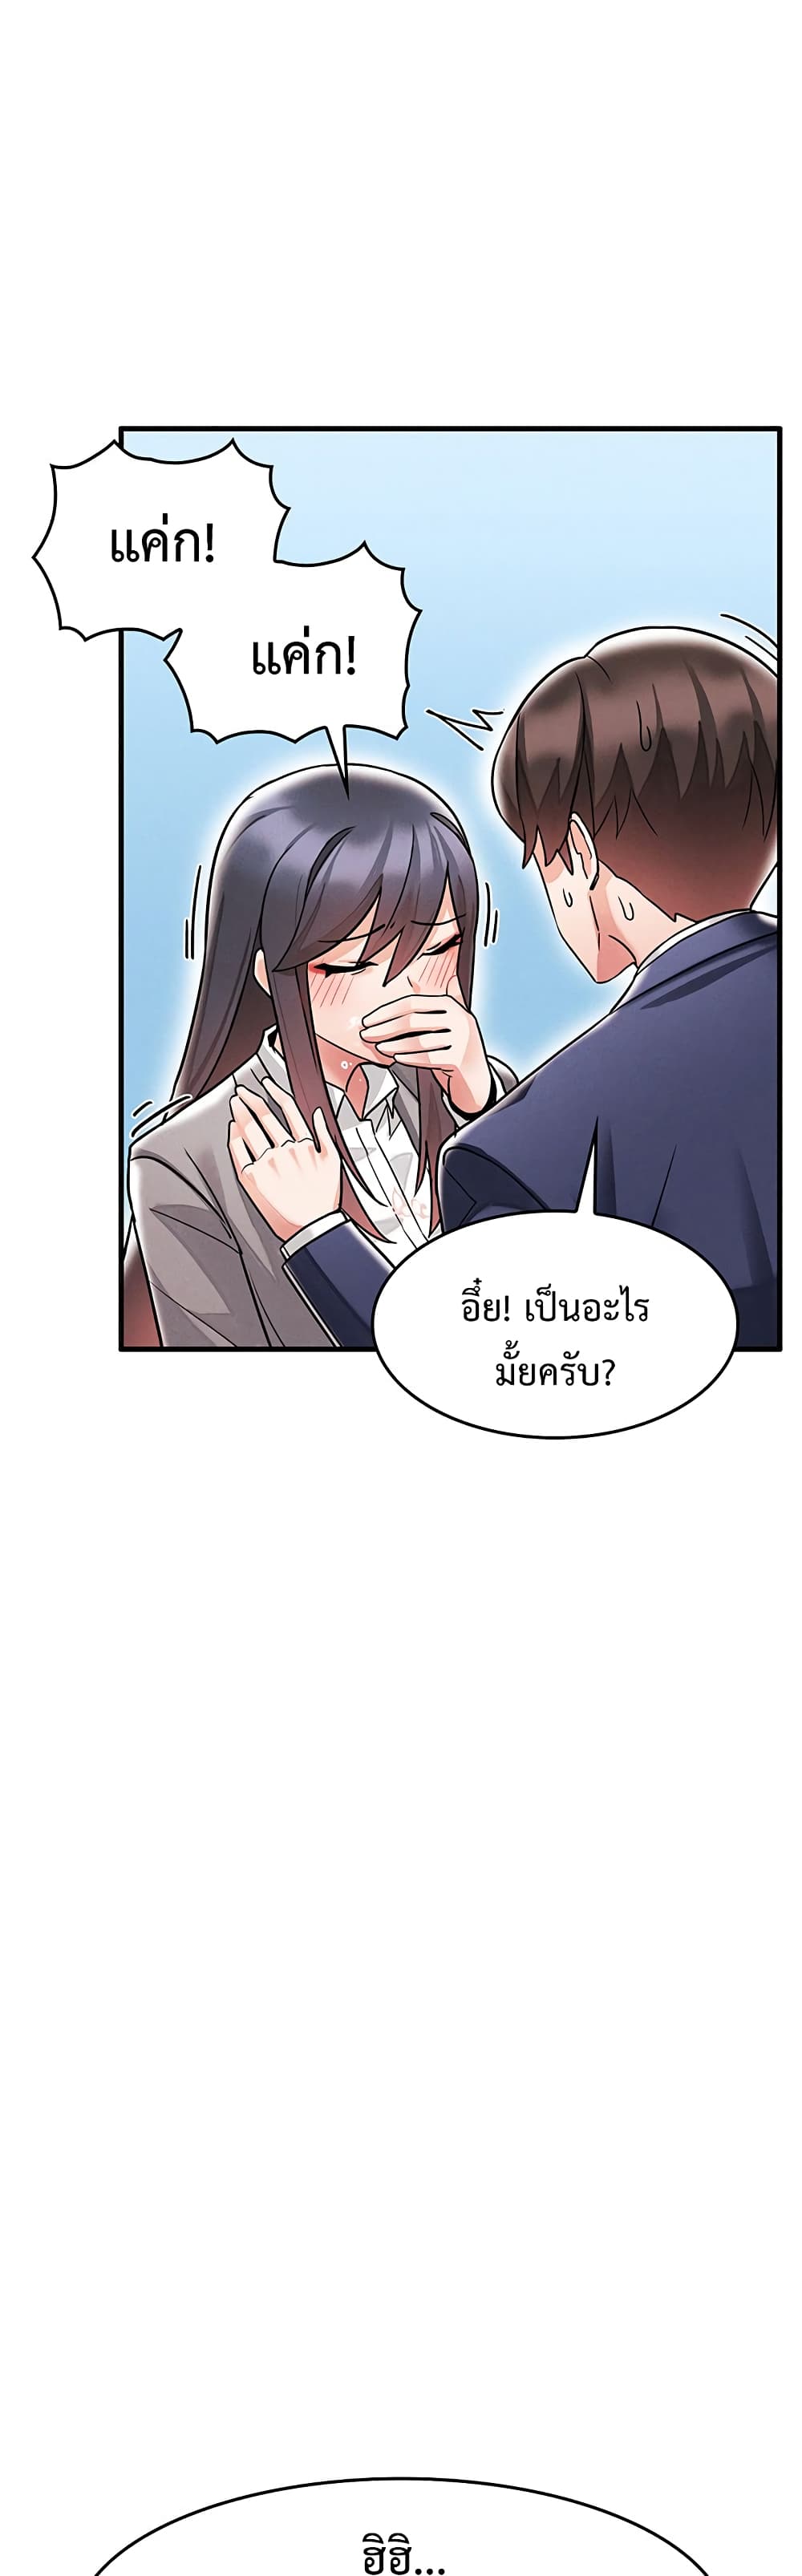 Relationship Reverse Button: Let’s Make Her Submissive 2 ภาพที่ 21